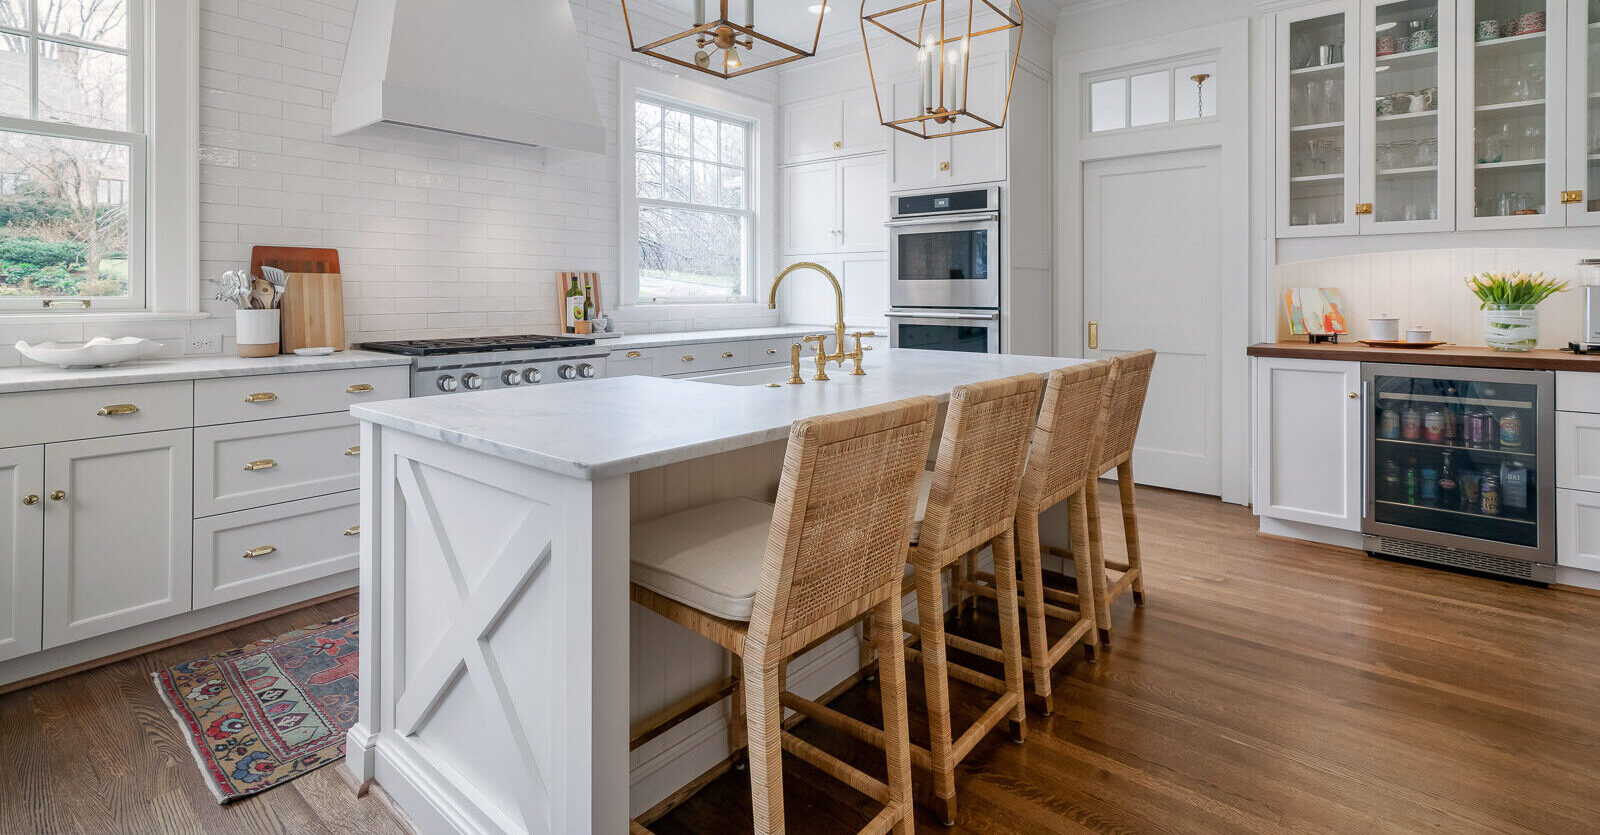 For this kitchen renovation in Winston Salem, we took a cramped galley-style space and transformed it into a large eat-in style kitchen for a family of four.